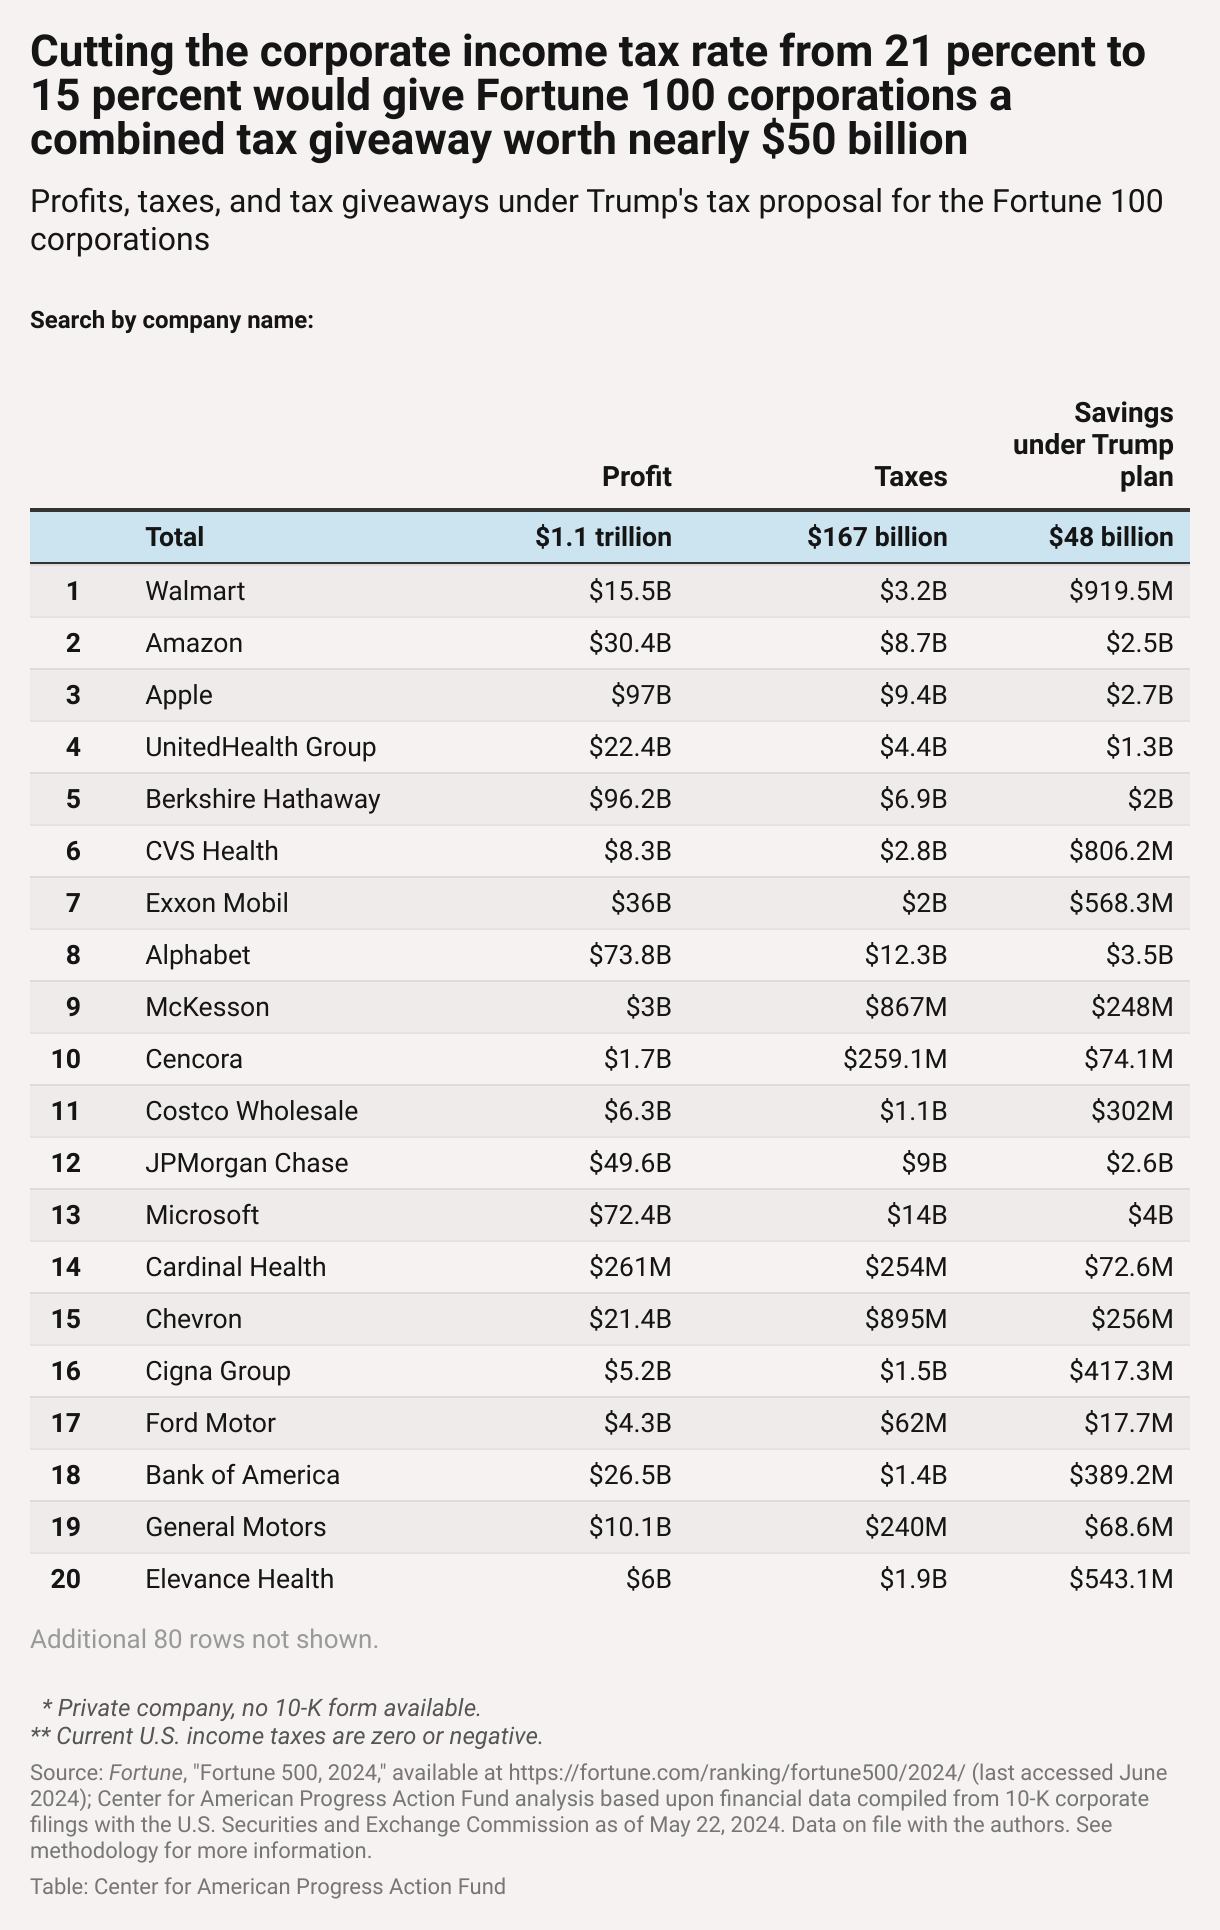 Table showing each Fortune 100 company's latest reported profits and federal income taxes paid along with the tax savings each company would receive from Trump's proposed corporate income tax cut. For example, JPMorgan's annual tax break would be more than $2.5 billion even though its latest reported annual profit was roughly $50 billion, and Comcast's annual tax break would be close to $2 billion while its latest annual reported profit was more than $15 billion. 